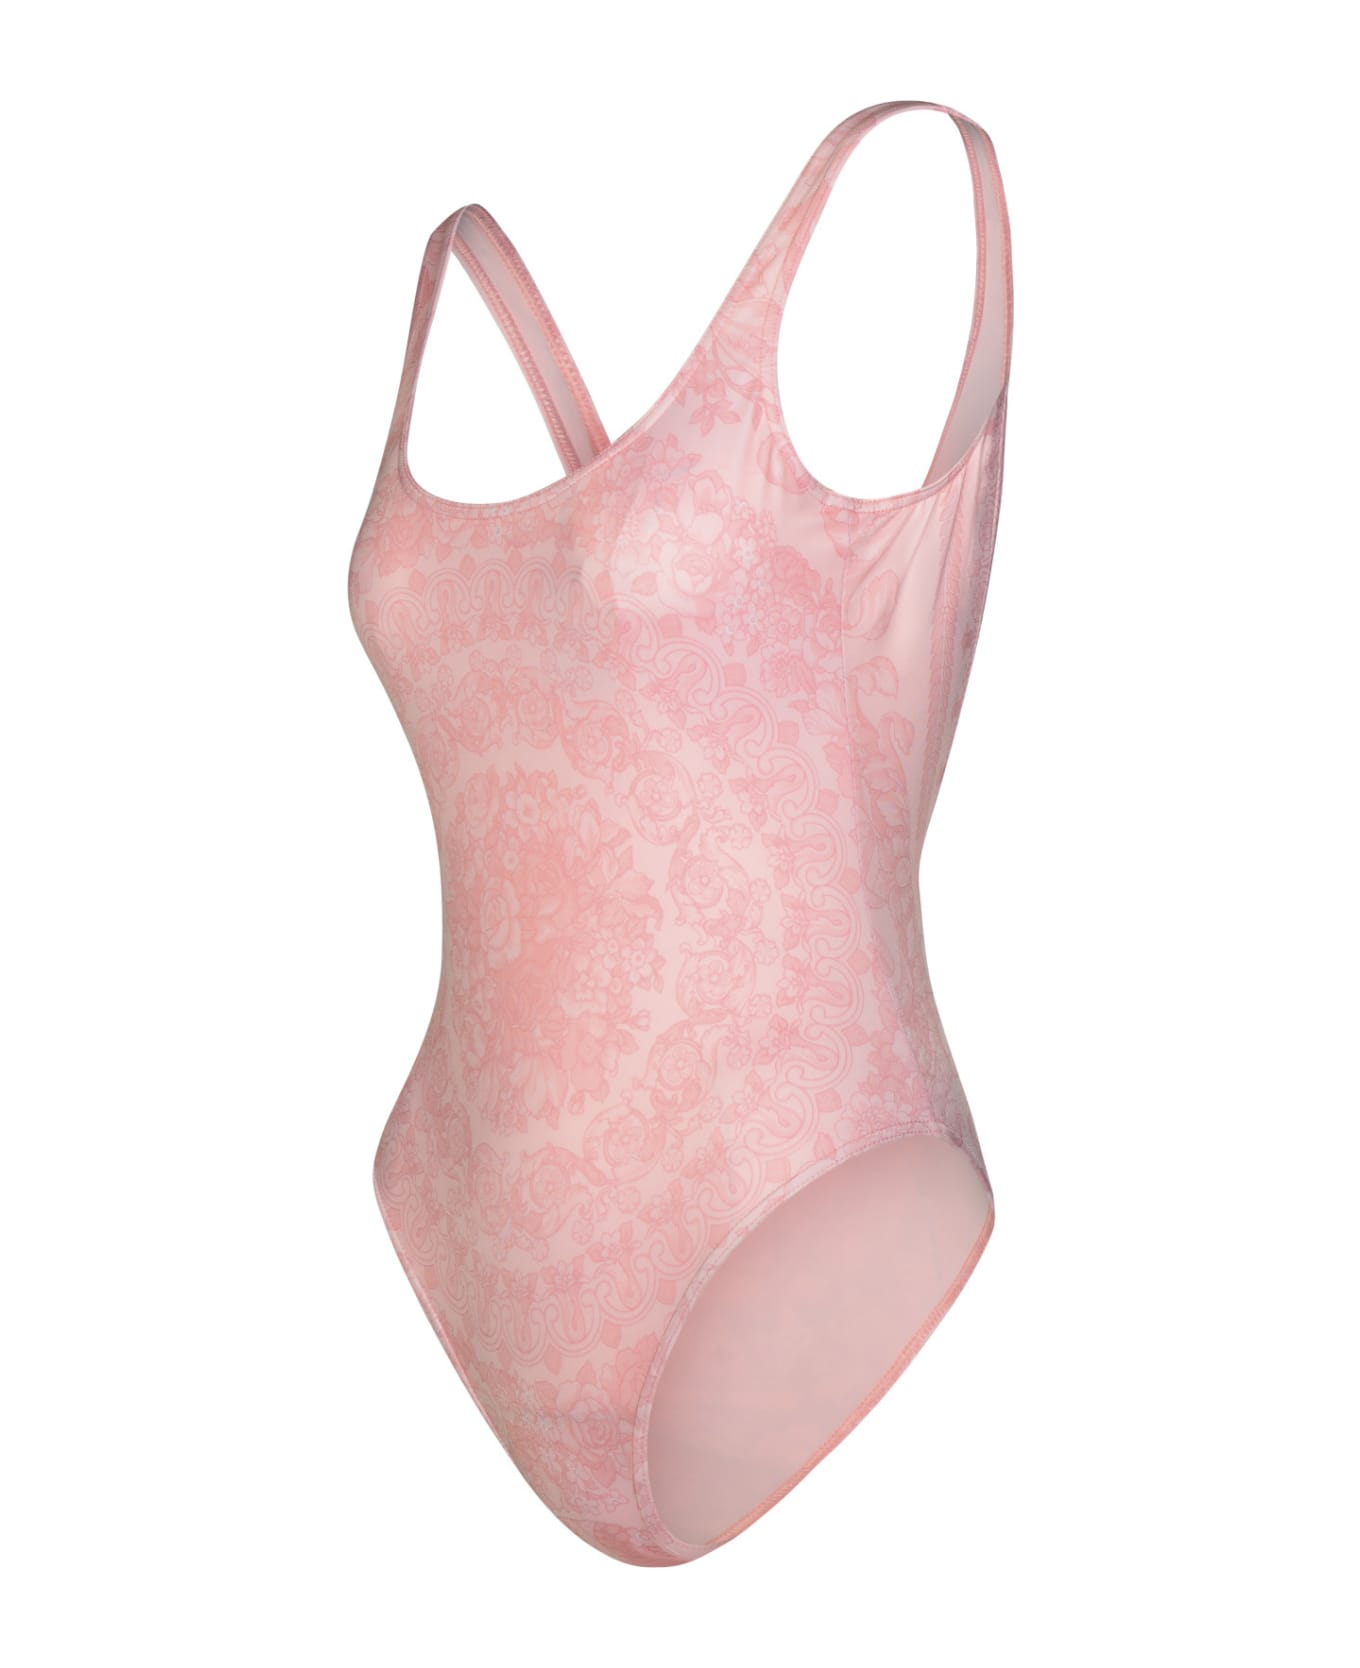 Versace 'barocco' One-piece Swimsuit In Pink Polyester Blend - Pink